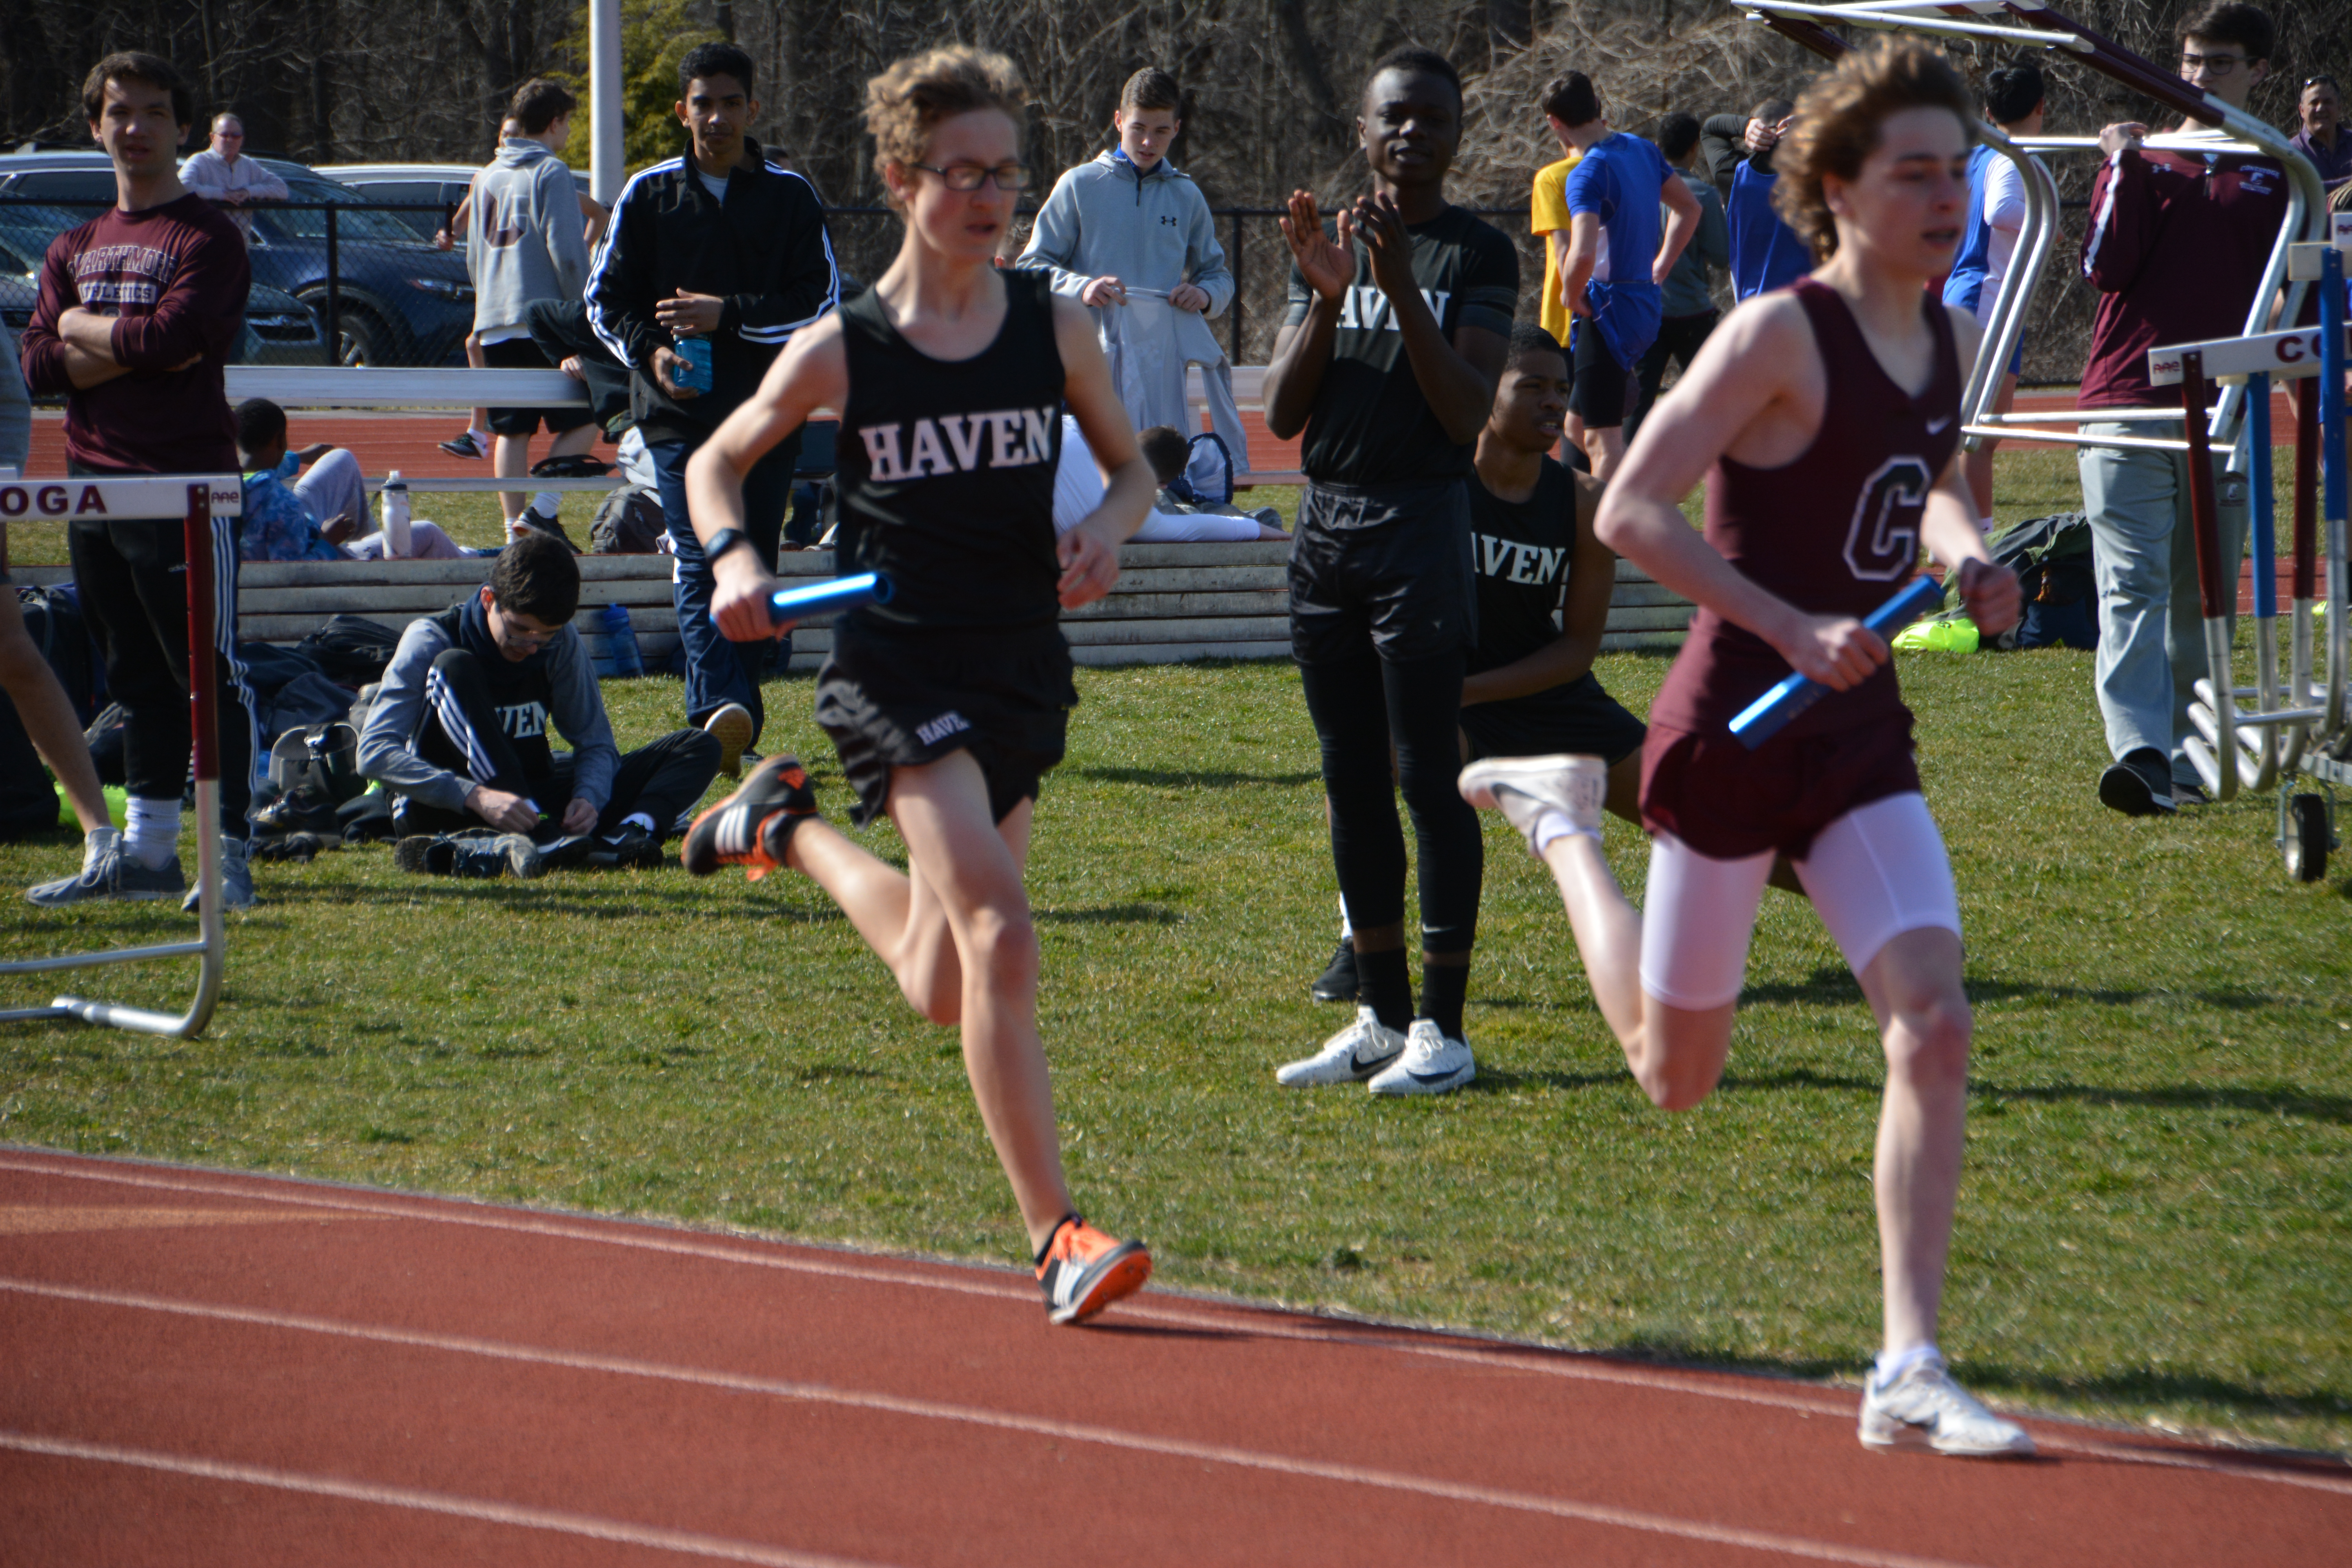 Photo gallery: Track and field hosts first meet of season